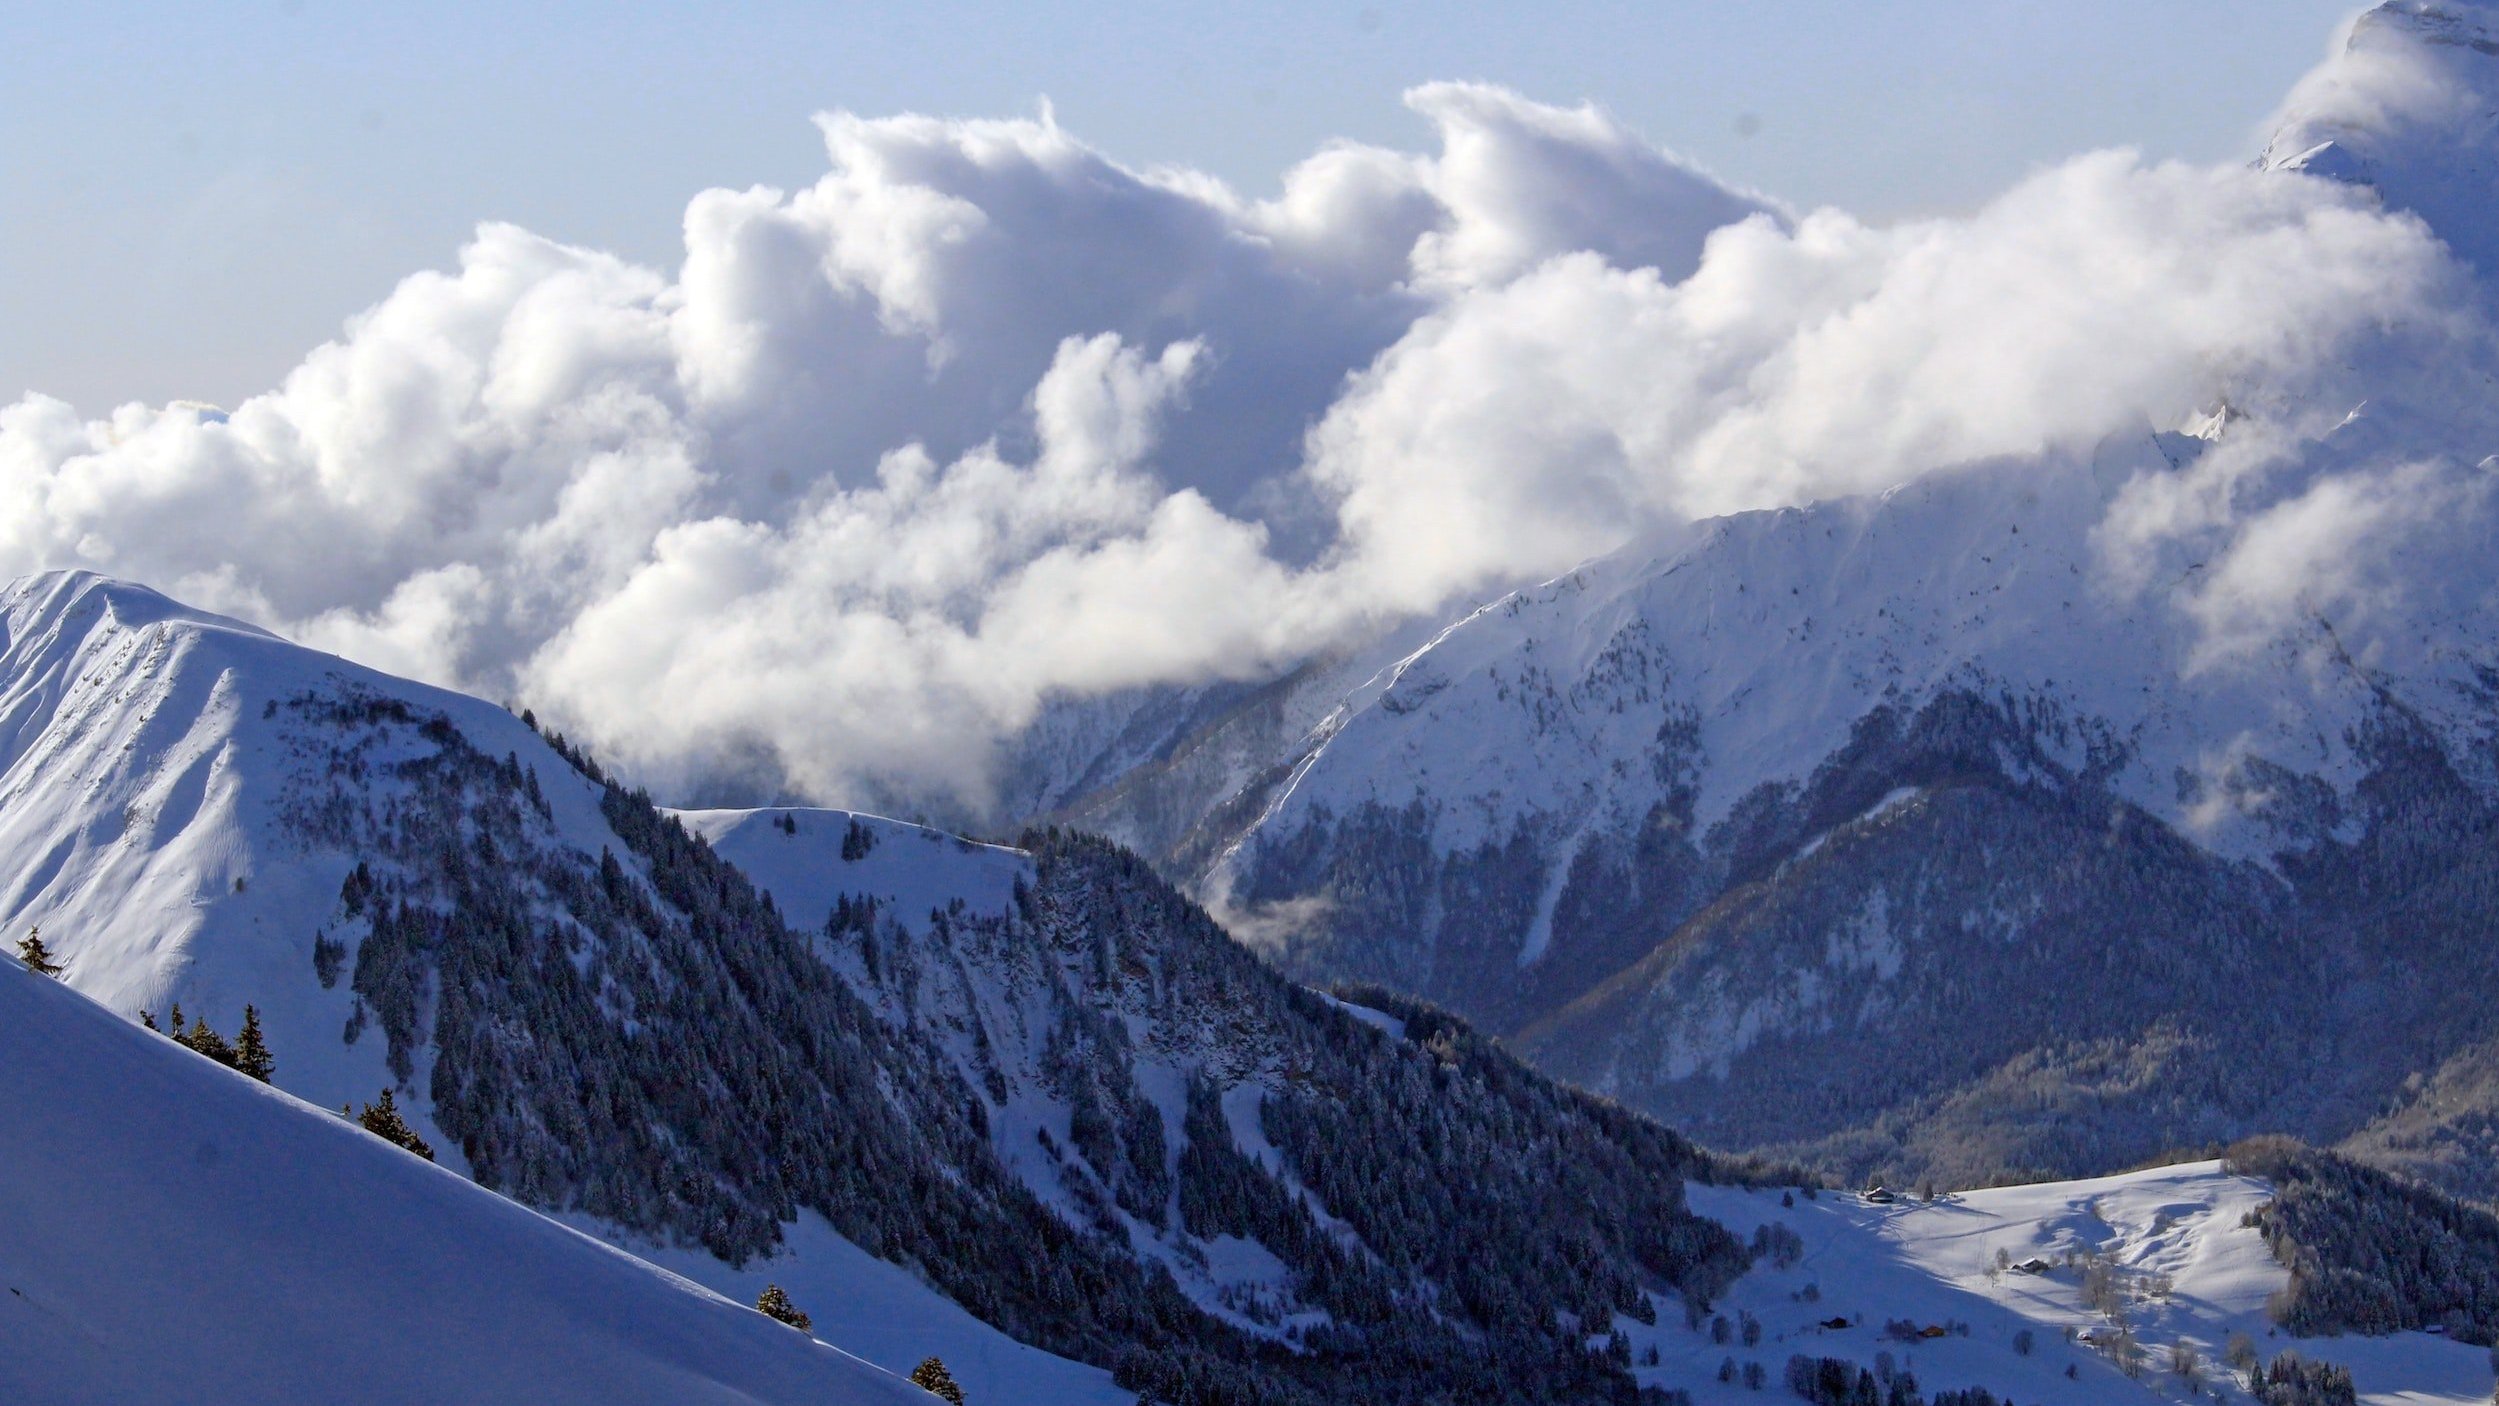 Discover the Alps and its ski slopes